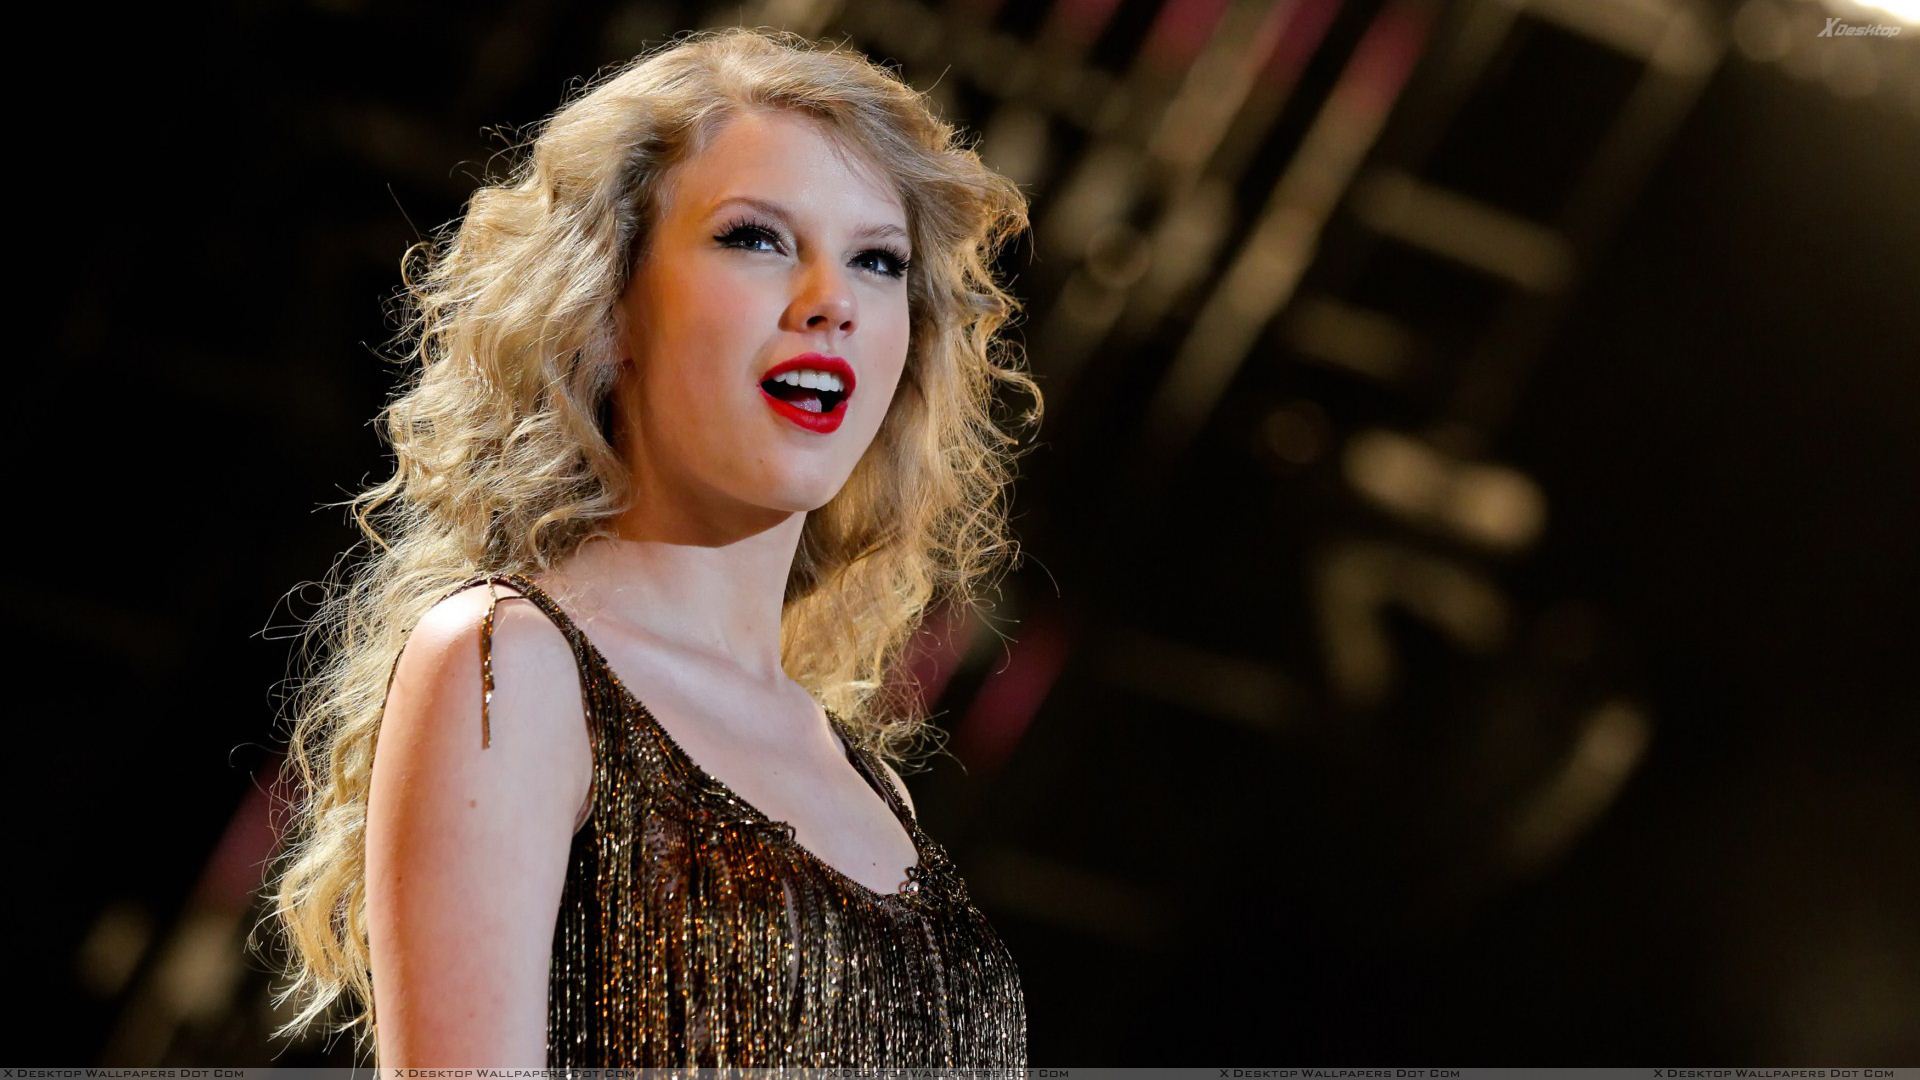 Taylor Swift Wallpapers, Photos & Images in HD